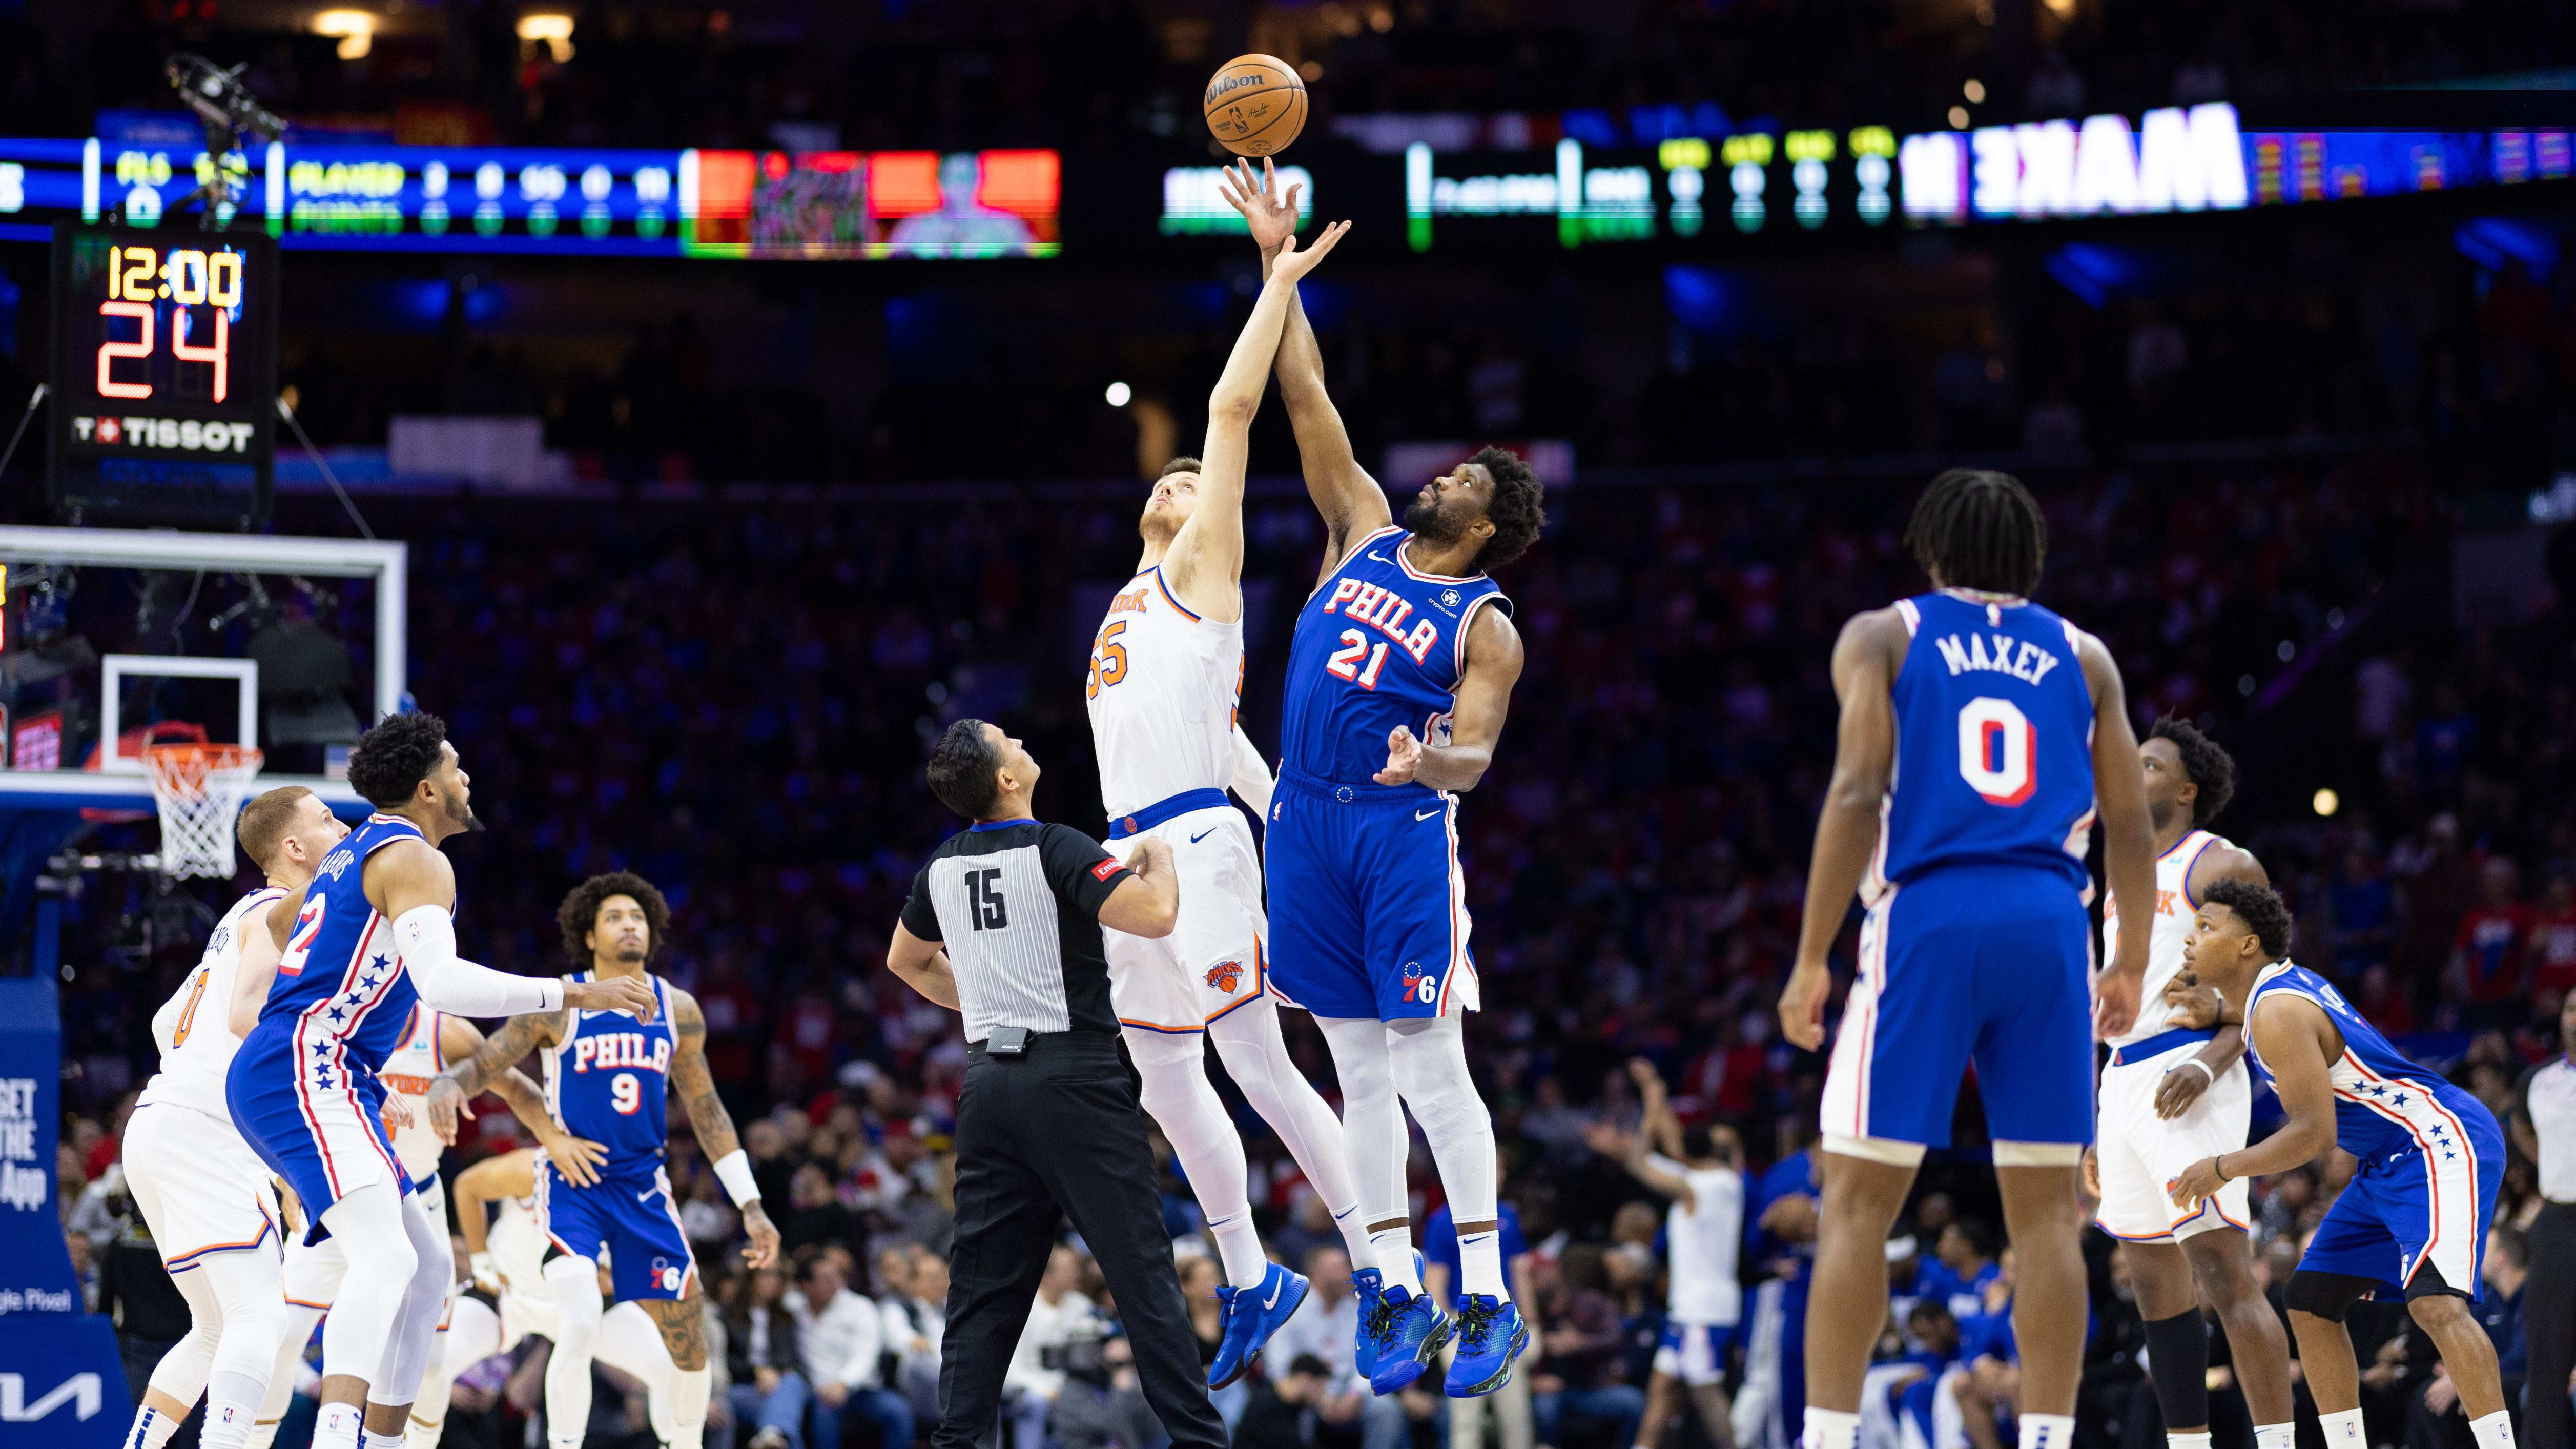 Independence Fall: Knicks Drop Game 3, 76ers’ Embiid Showcase